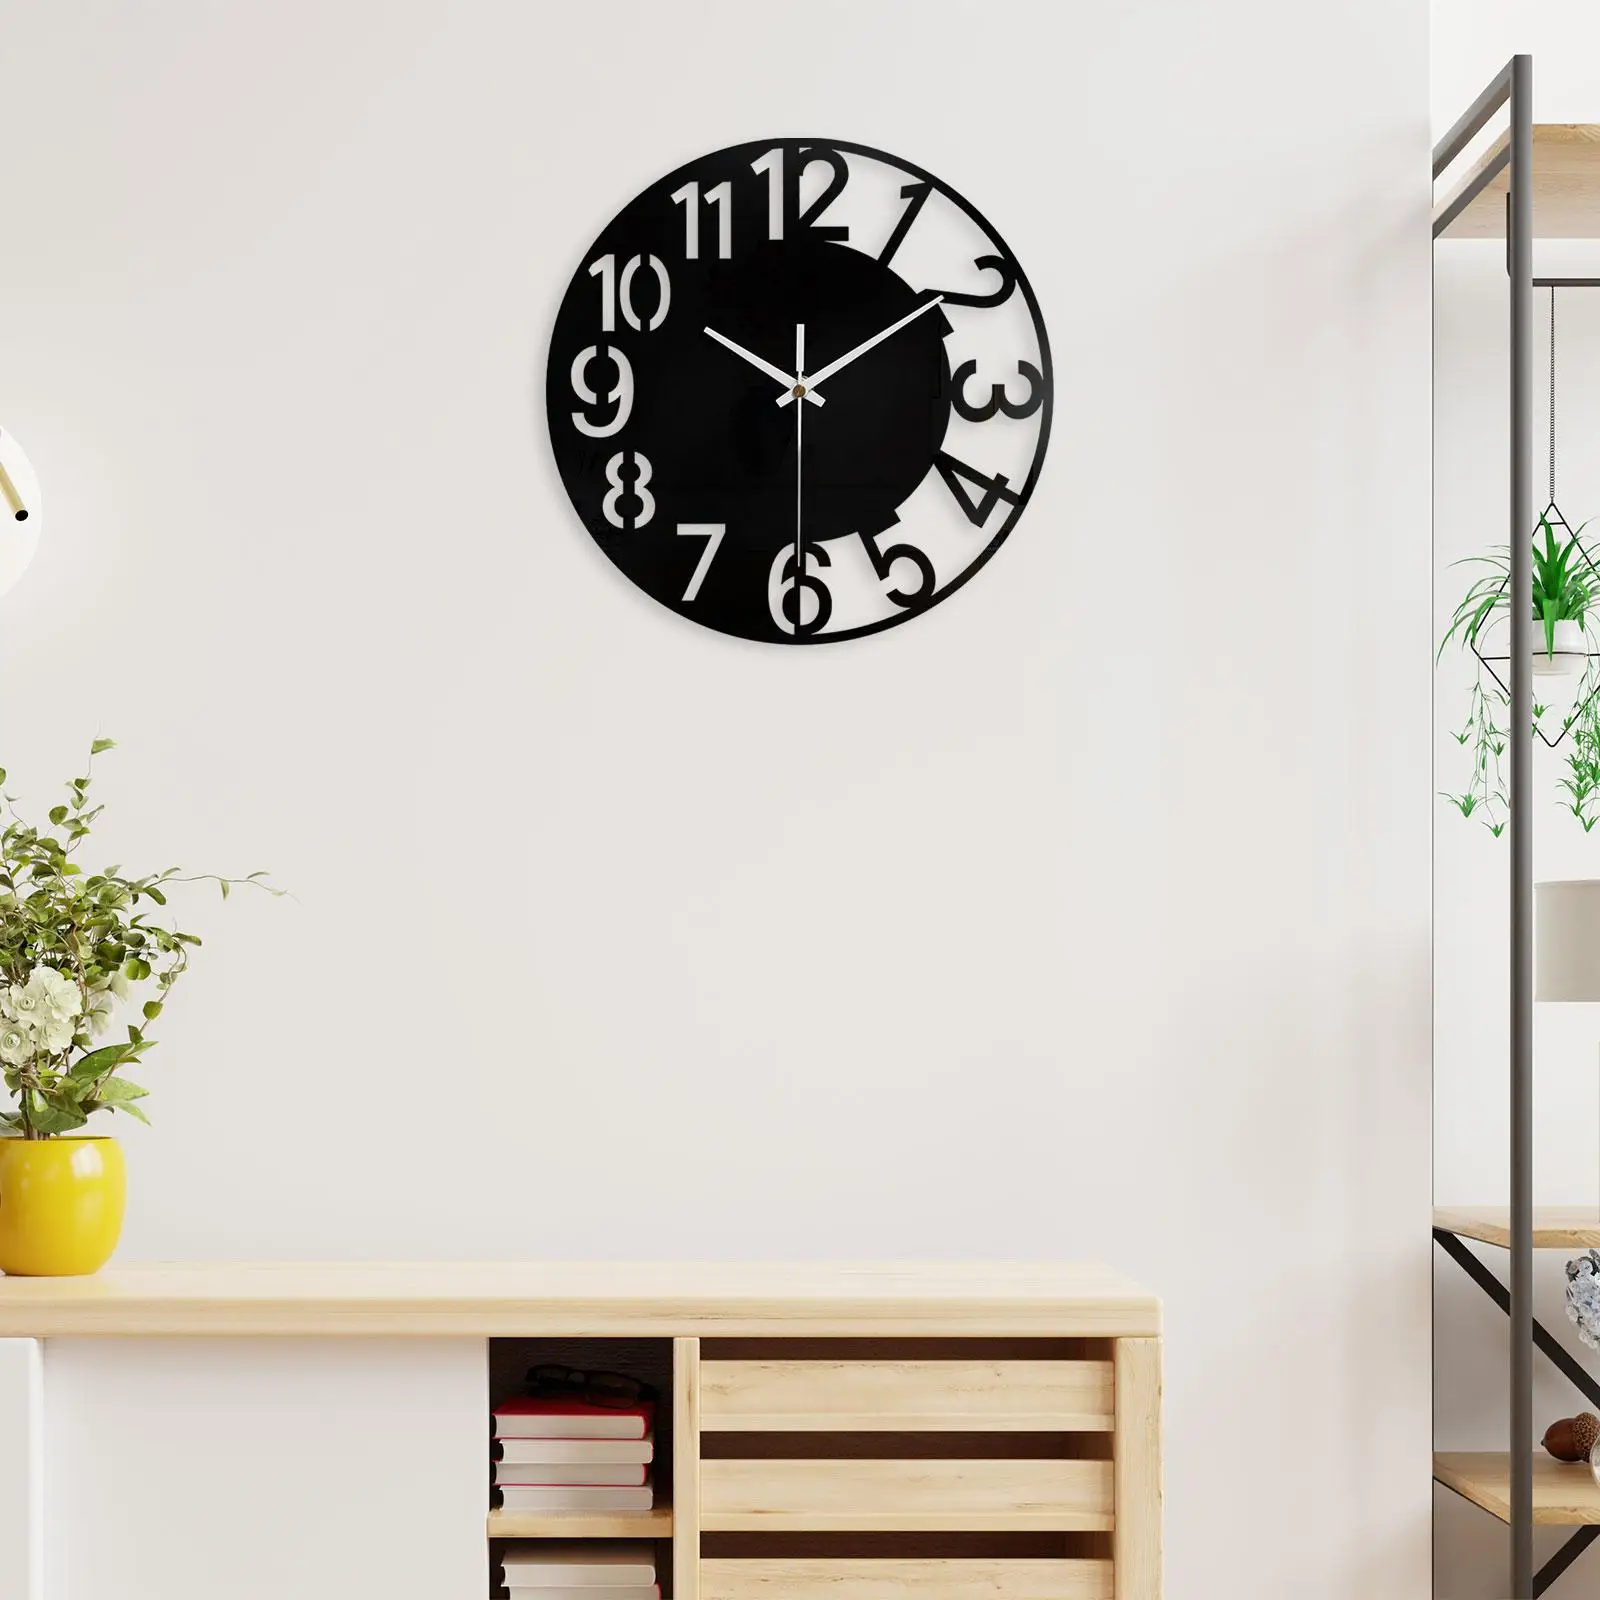 Acrylic Wall Clock Simple Silent Festival Gift Decorative Clock Large Wall Clock for Kitchen Bedroom Living Room Hotel Bathroom